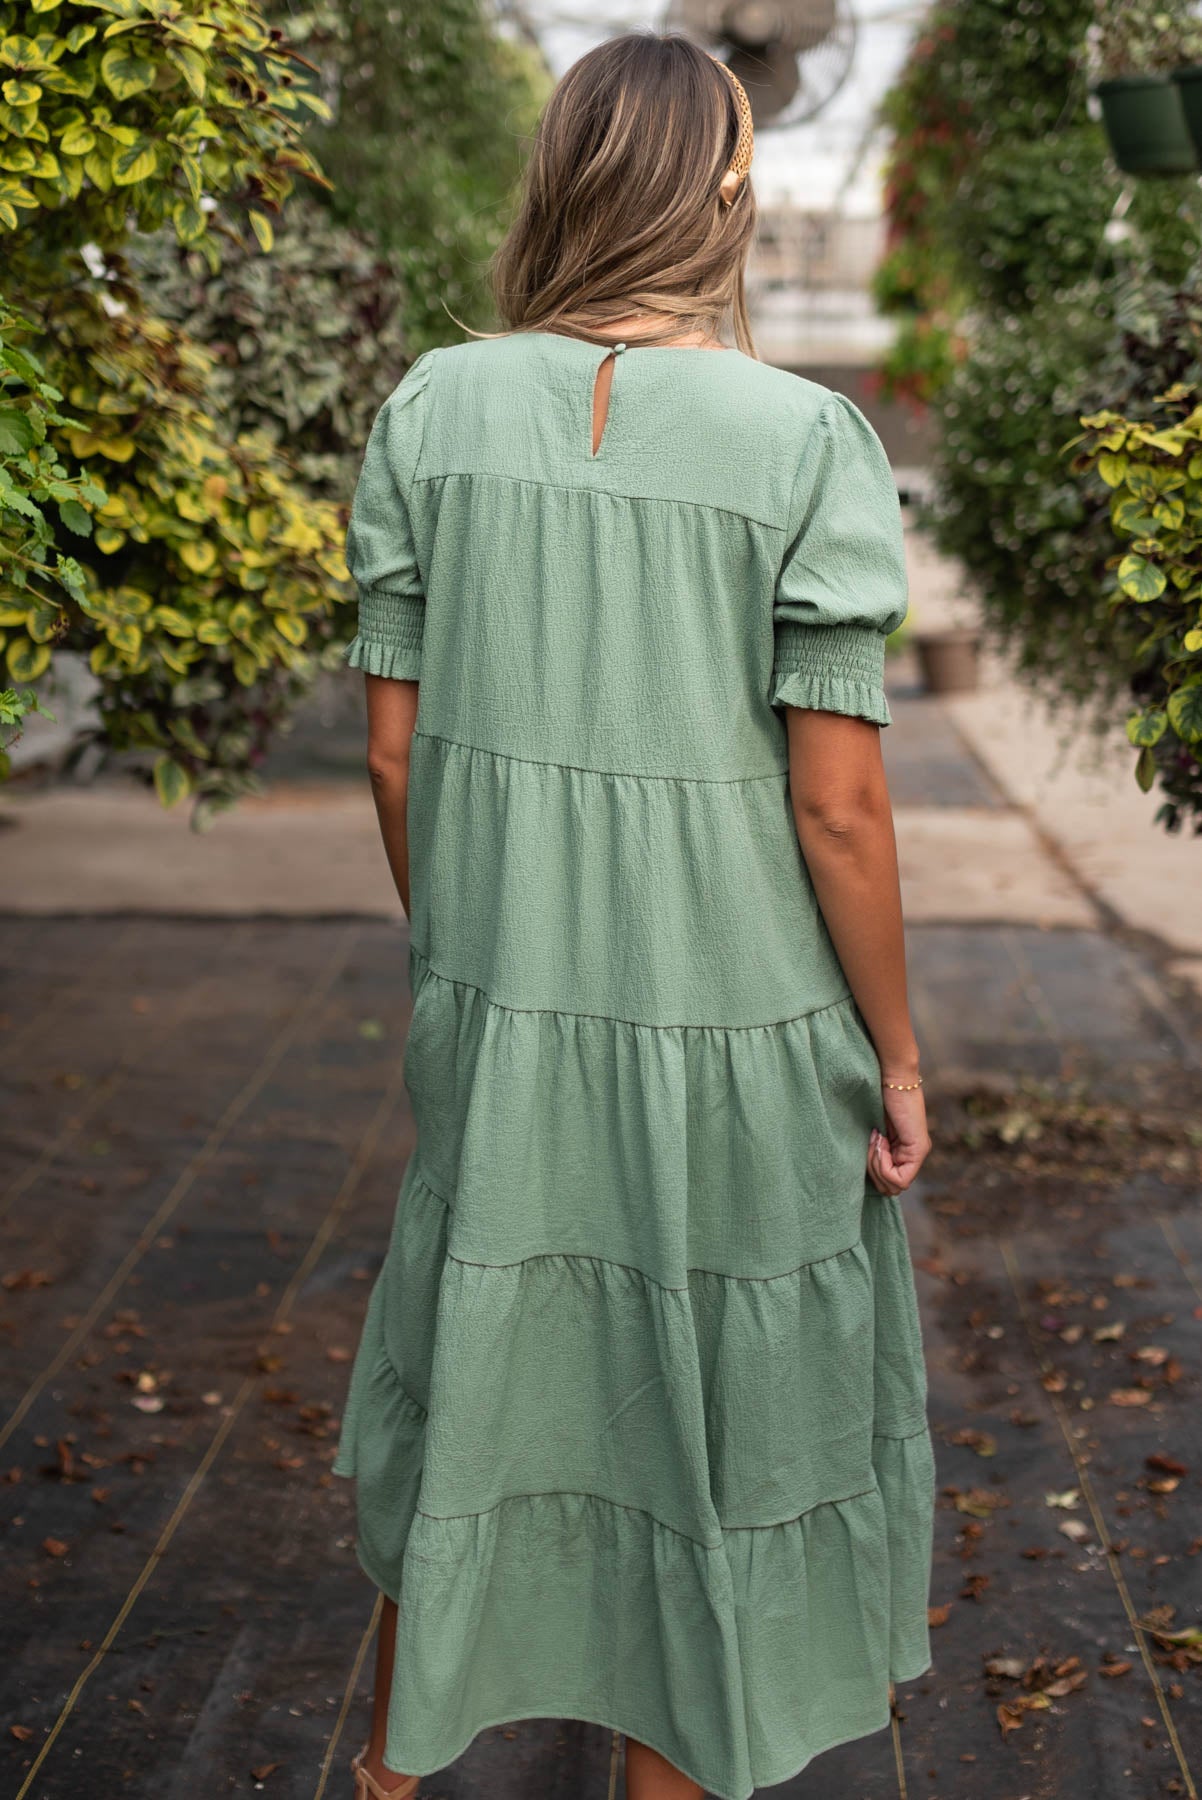 Back view of the tiered green dress